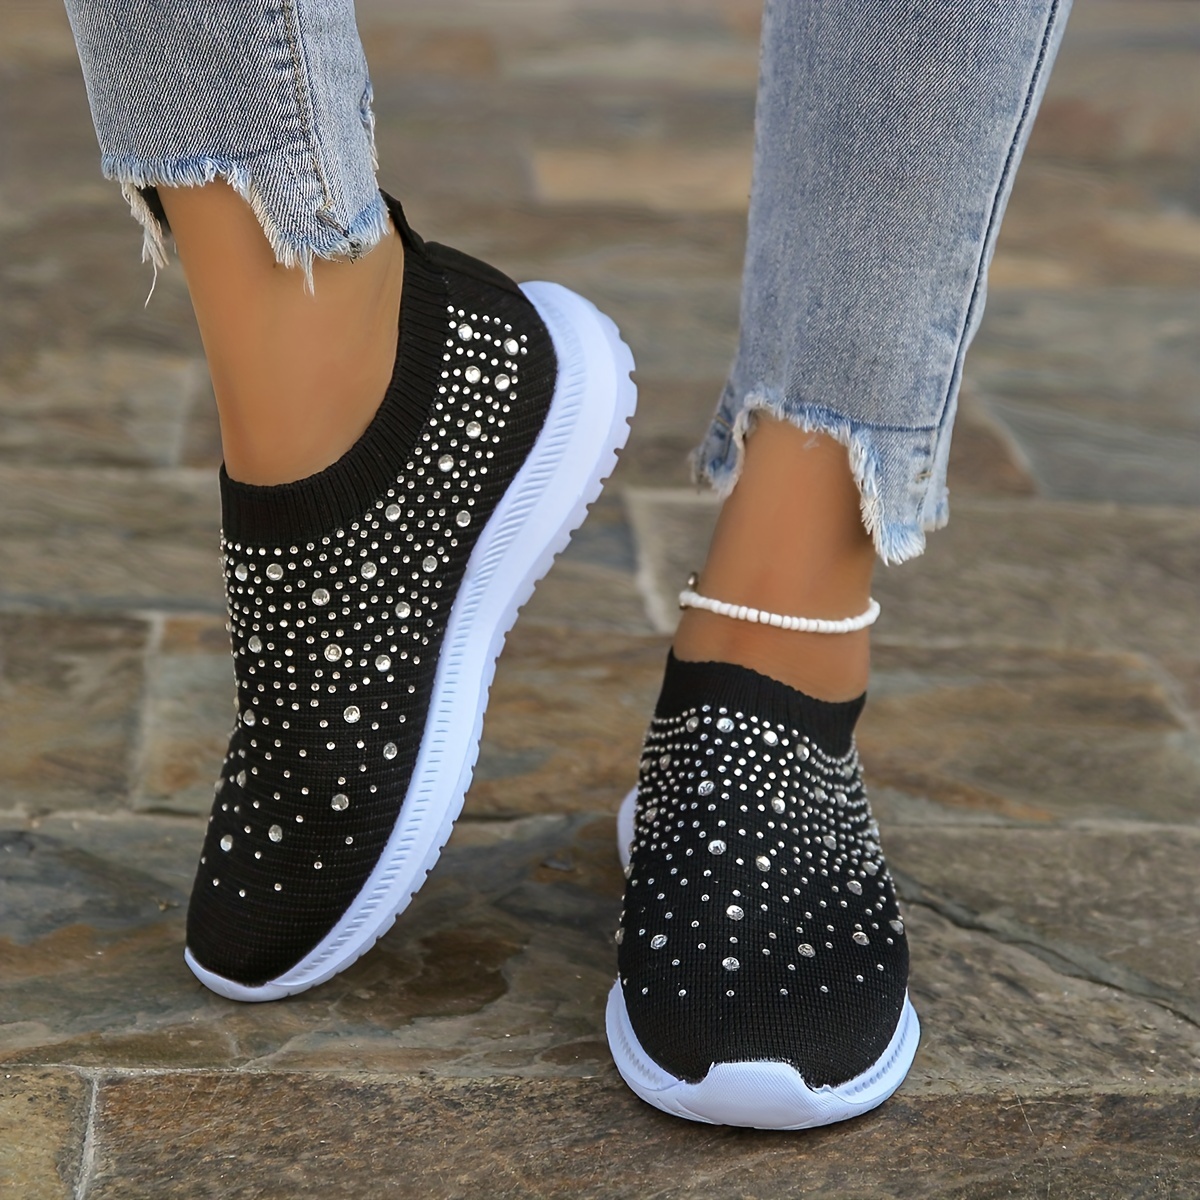 Women's Rhinestones Sneakers & Athletic Shoes + FREE SHIPPING